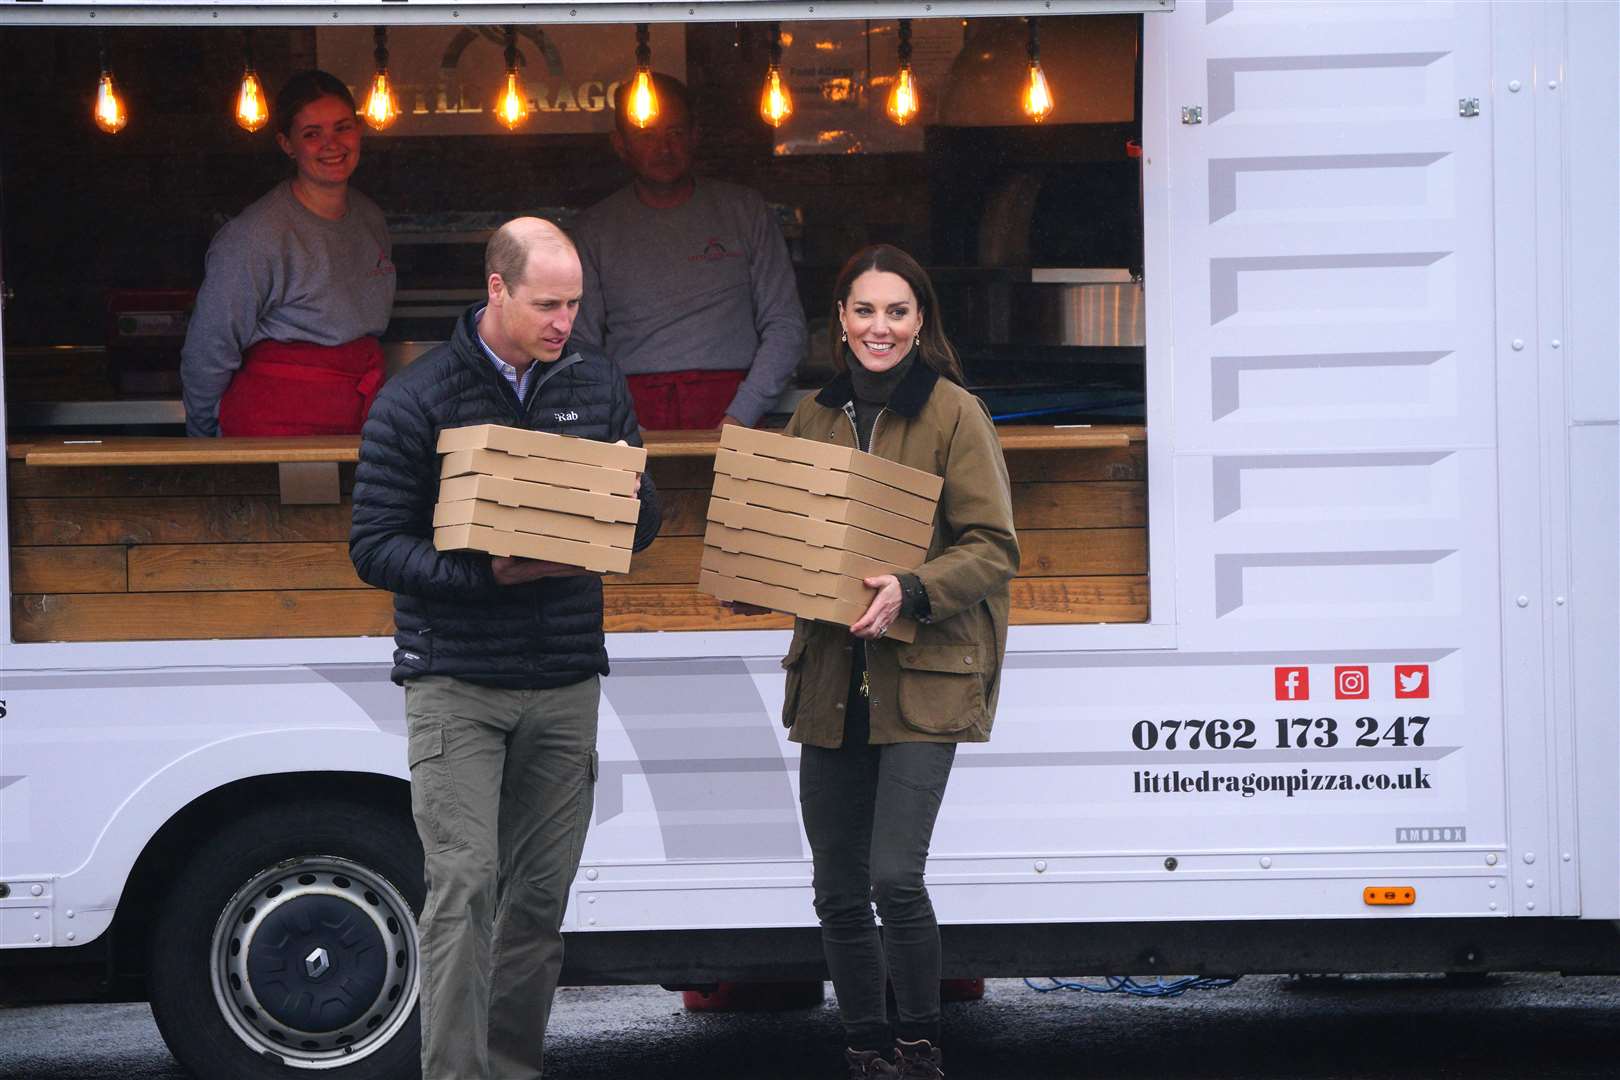 The Prince and Princess of Wales order 12 pizzas to say thank you to the mountain rescue team as they arrive for a visit to Dowlais Rugby Club near Merthyr Tydfil (Ben Birchall/PA)